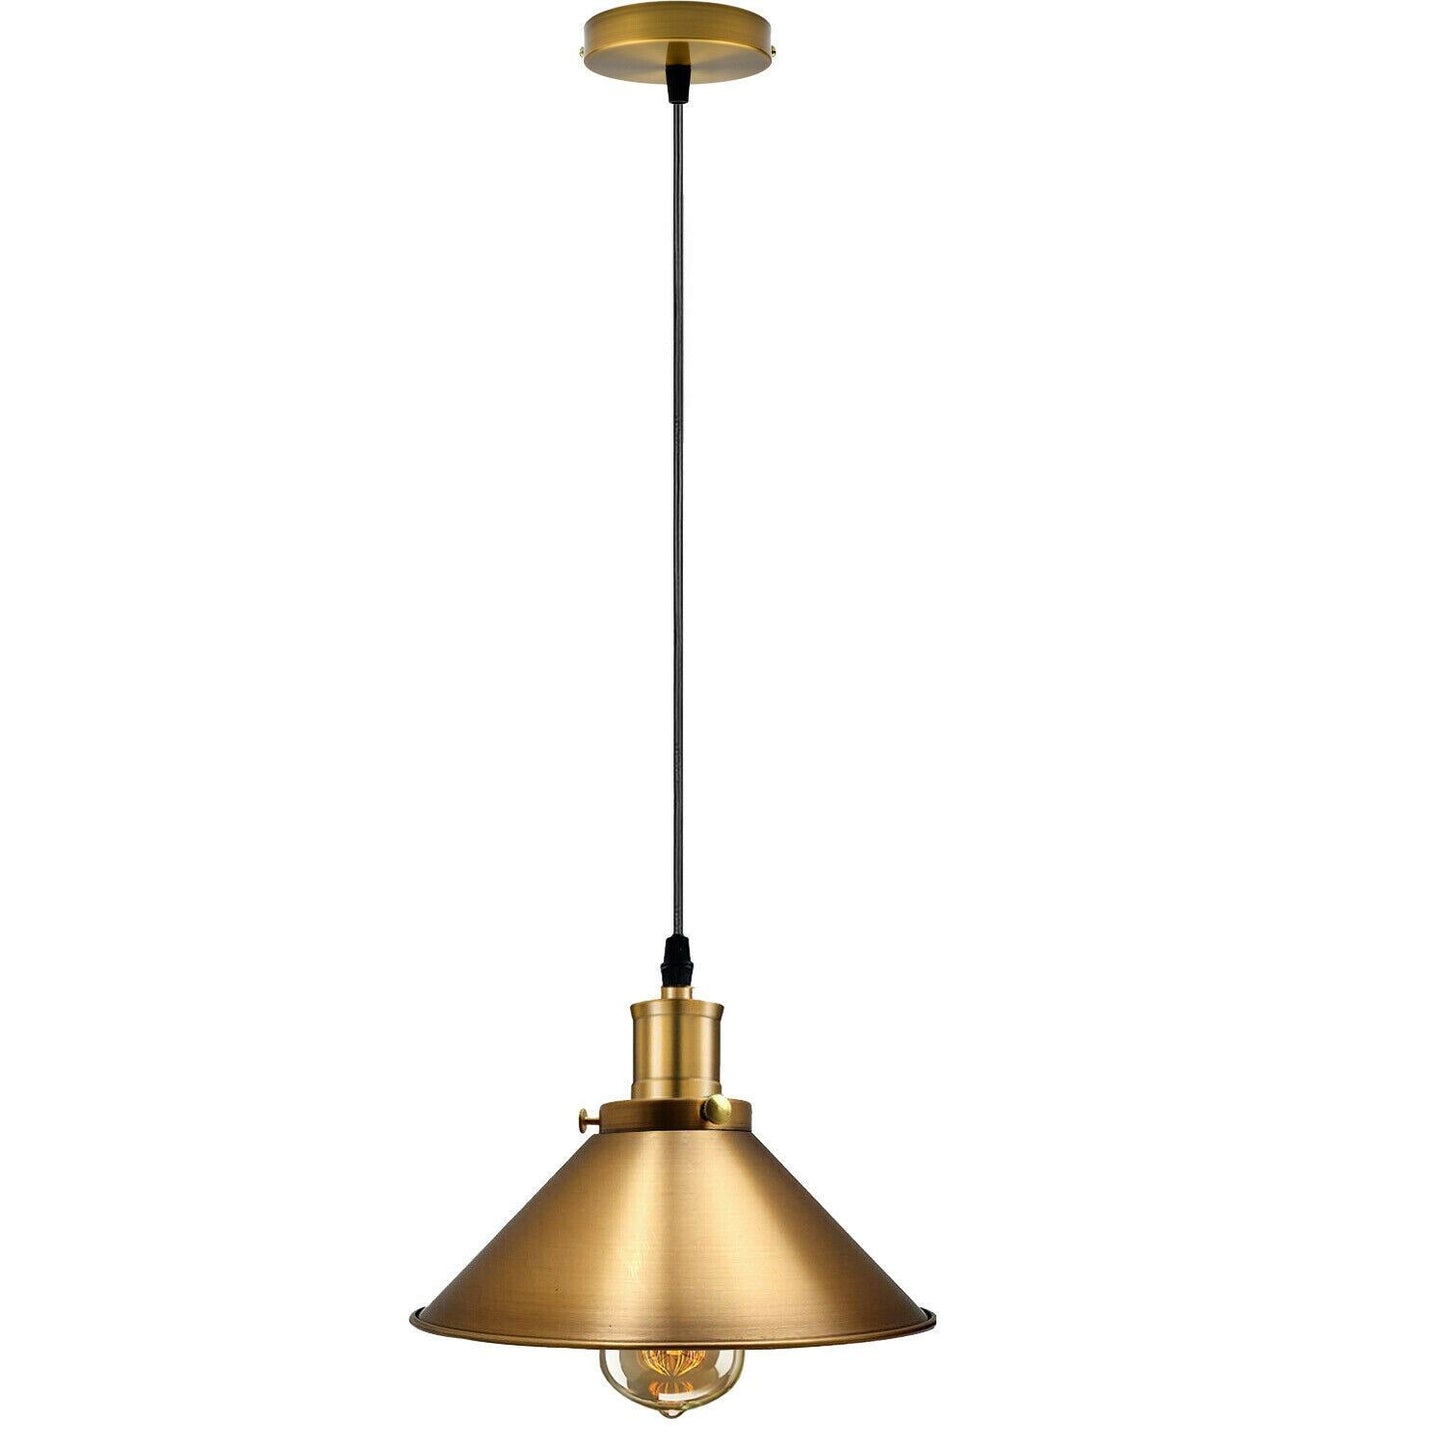 Modern Industrial Style Metal Cage Single Pendant Light Yellow brass Ceiling Light Fixture~2120